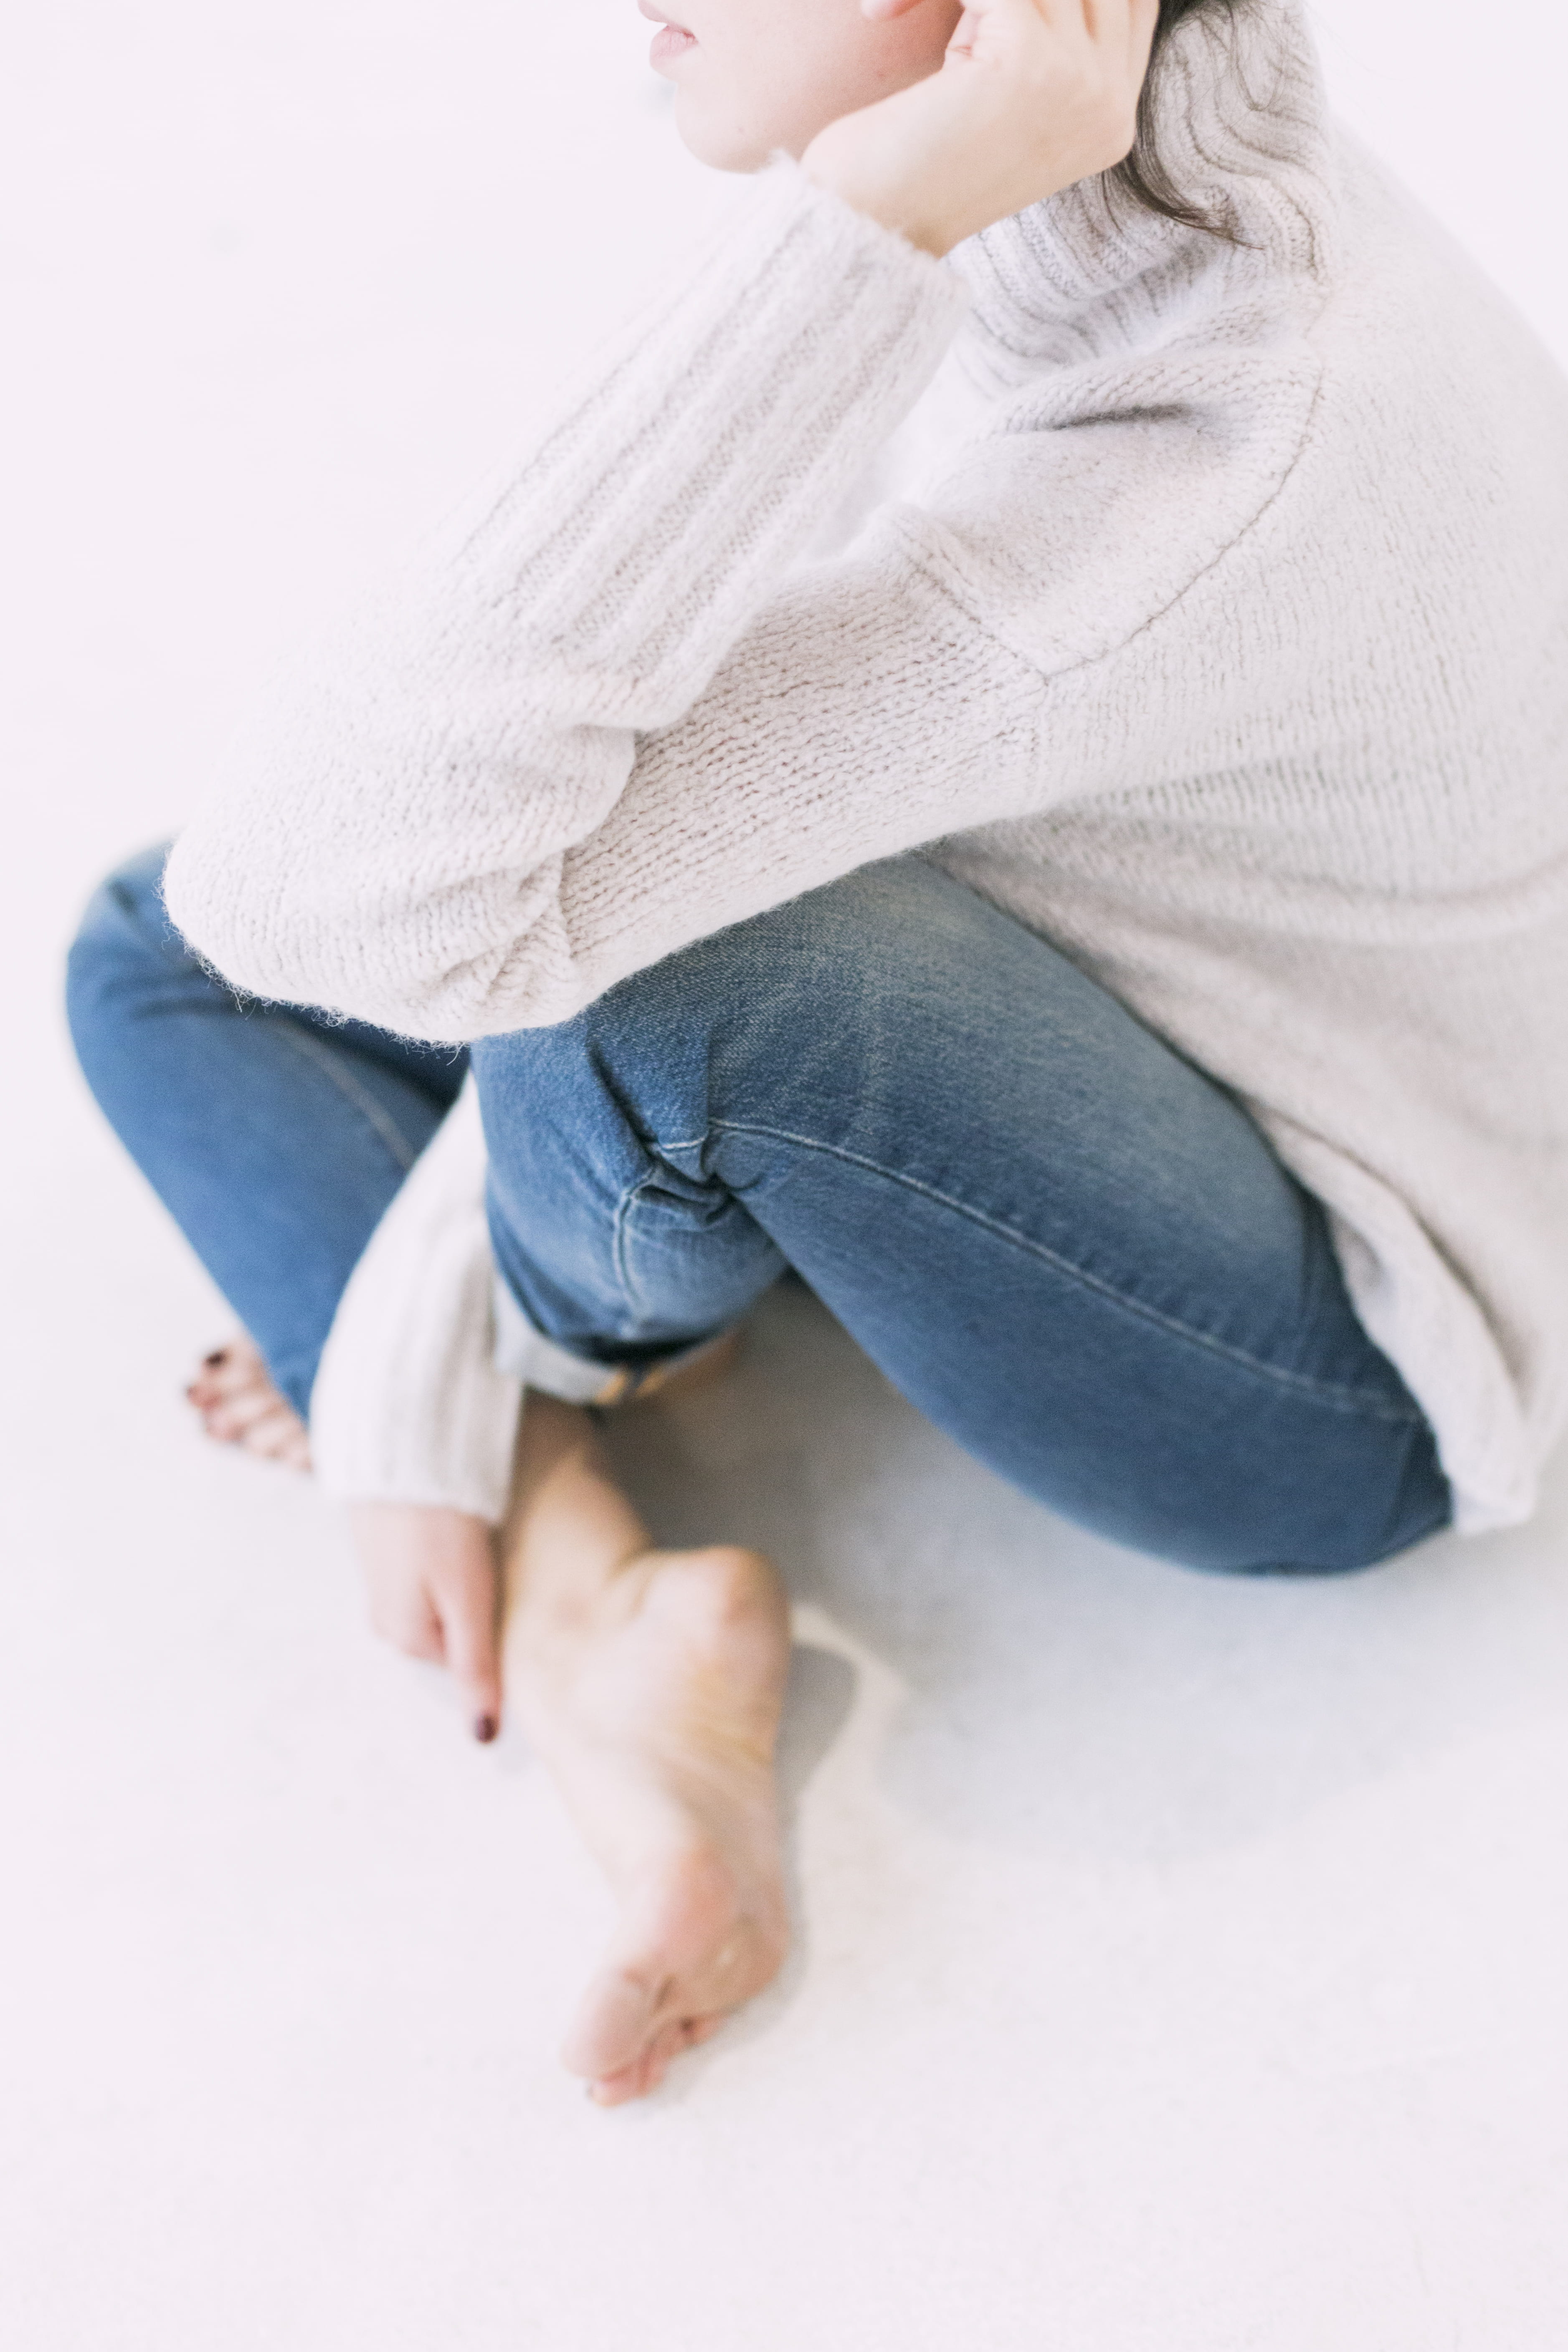 Woman in Gray Sweater and Blue Denim Jeans, adult, cute, feet